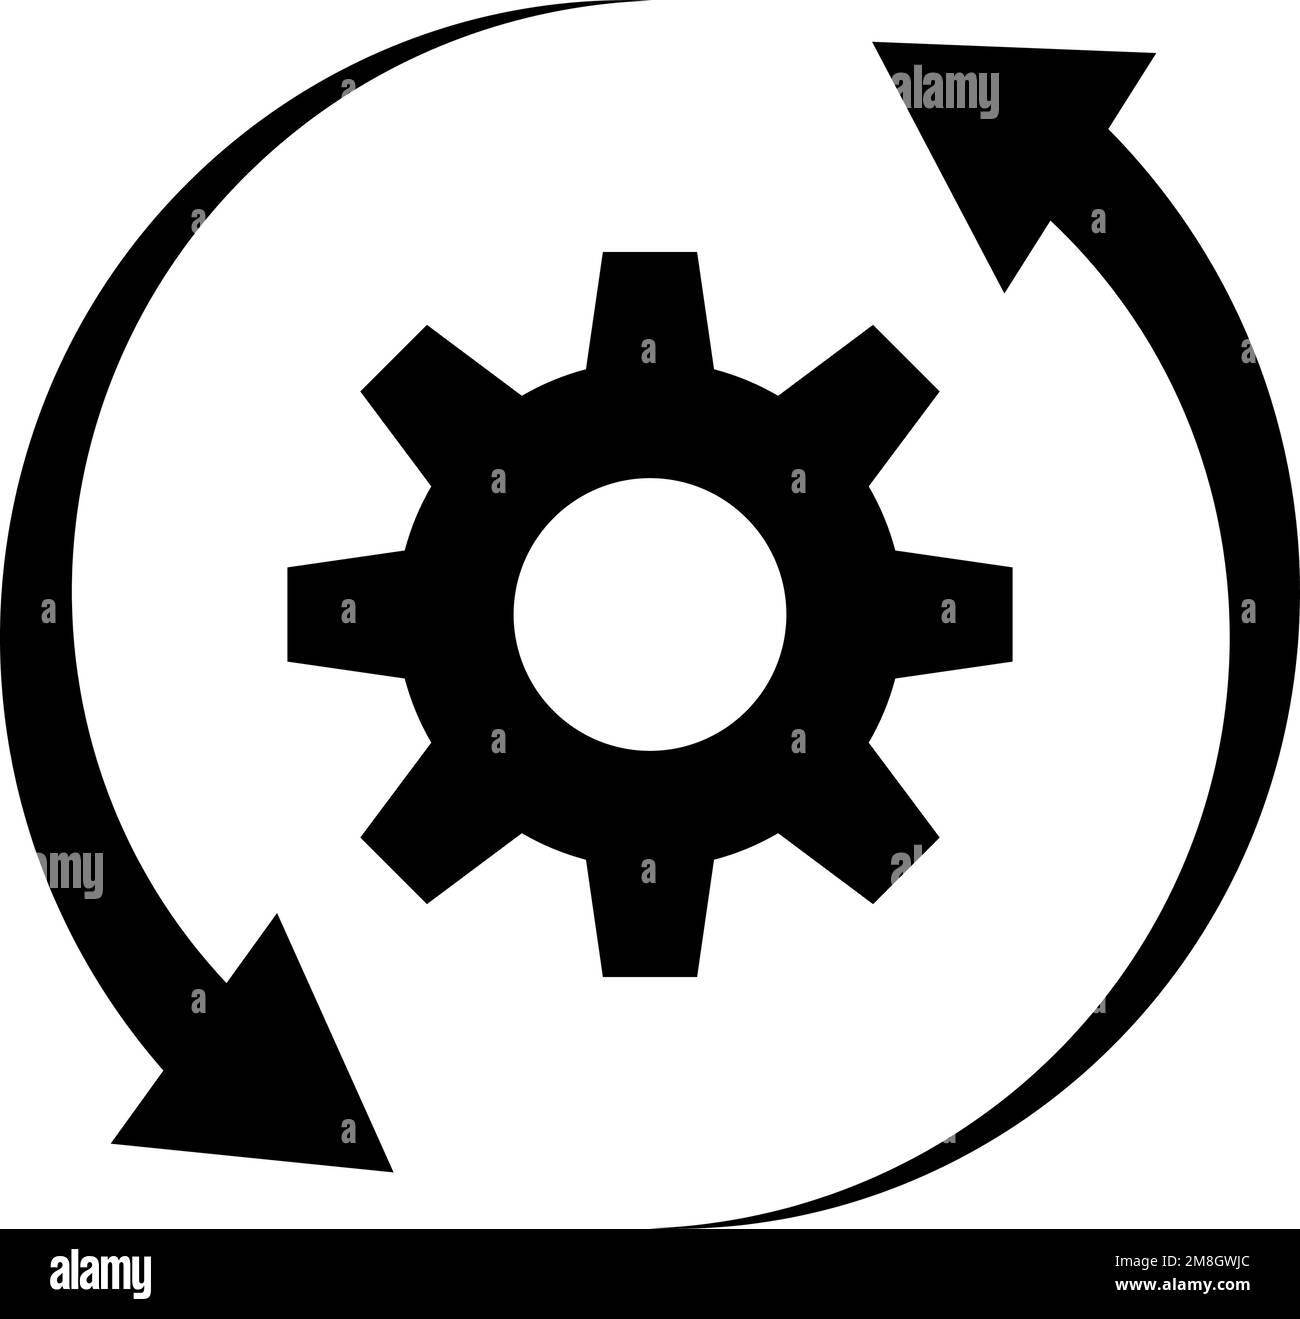 Rotating gear system Black and White Stock Photos & Images - Alamy